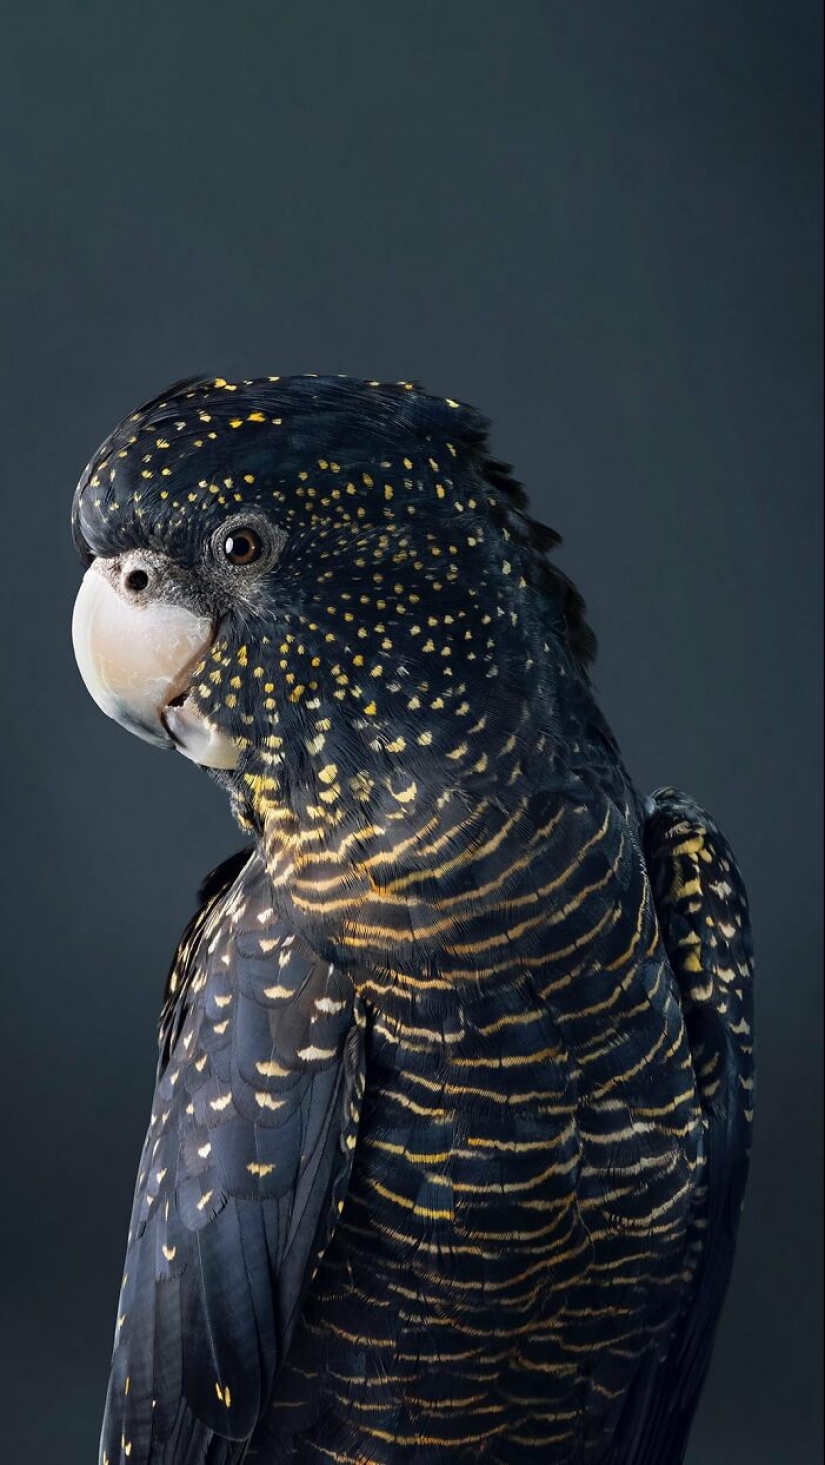 12 New Photos Of Perfectly Posed Birds Captured By Photographer Leila Jeffreys